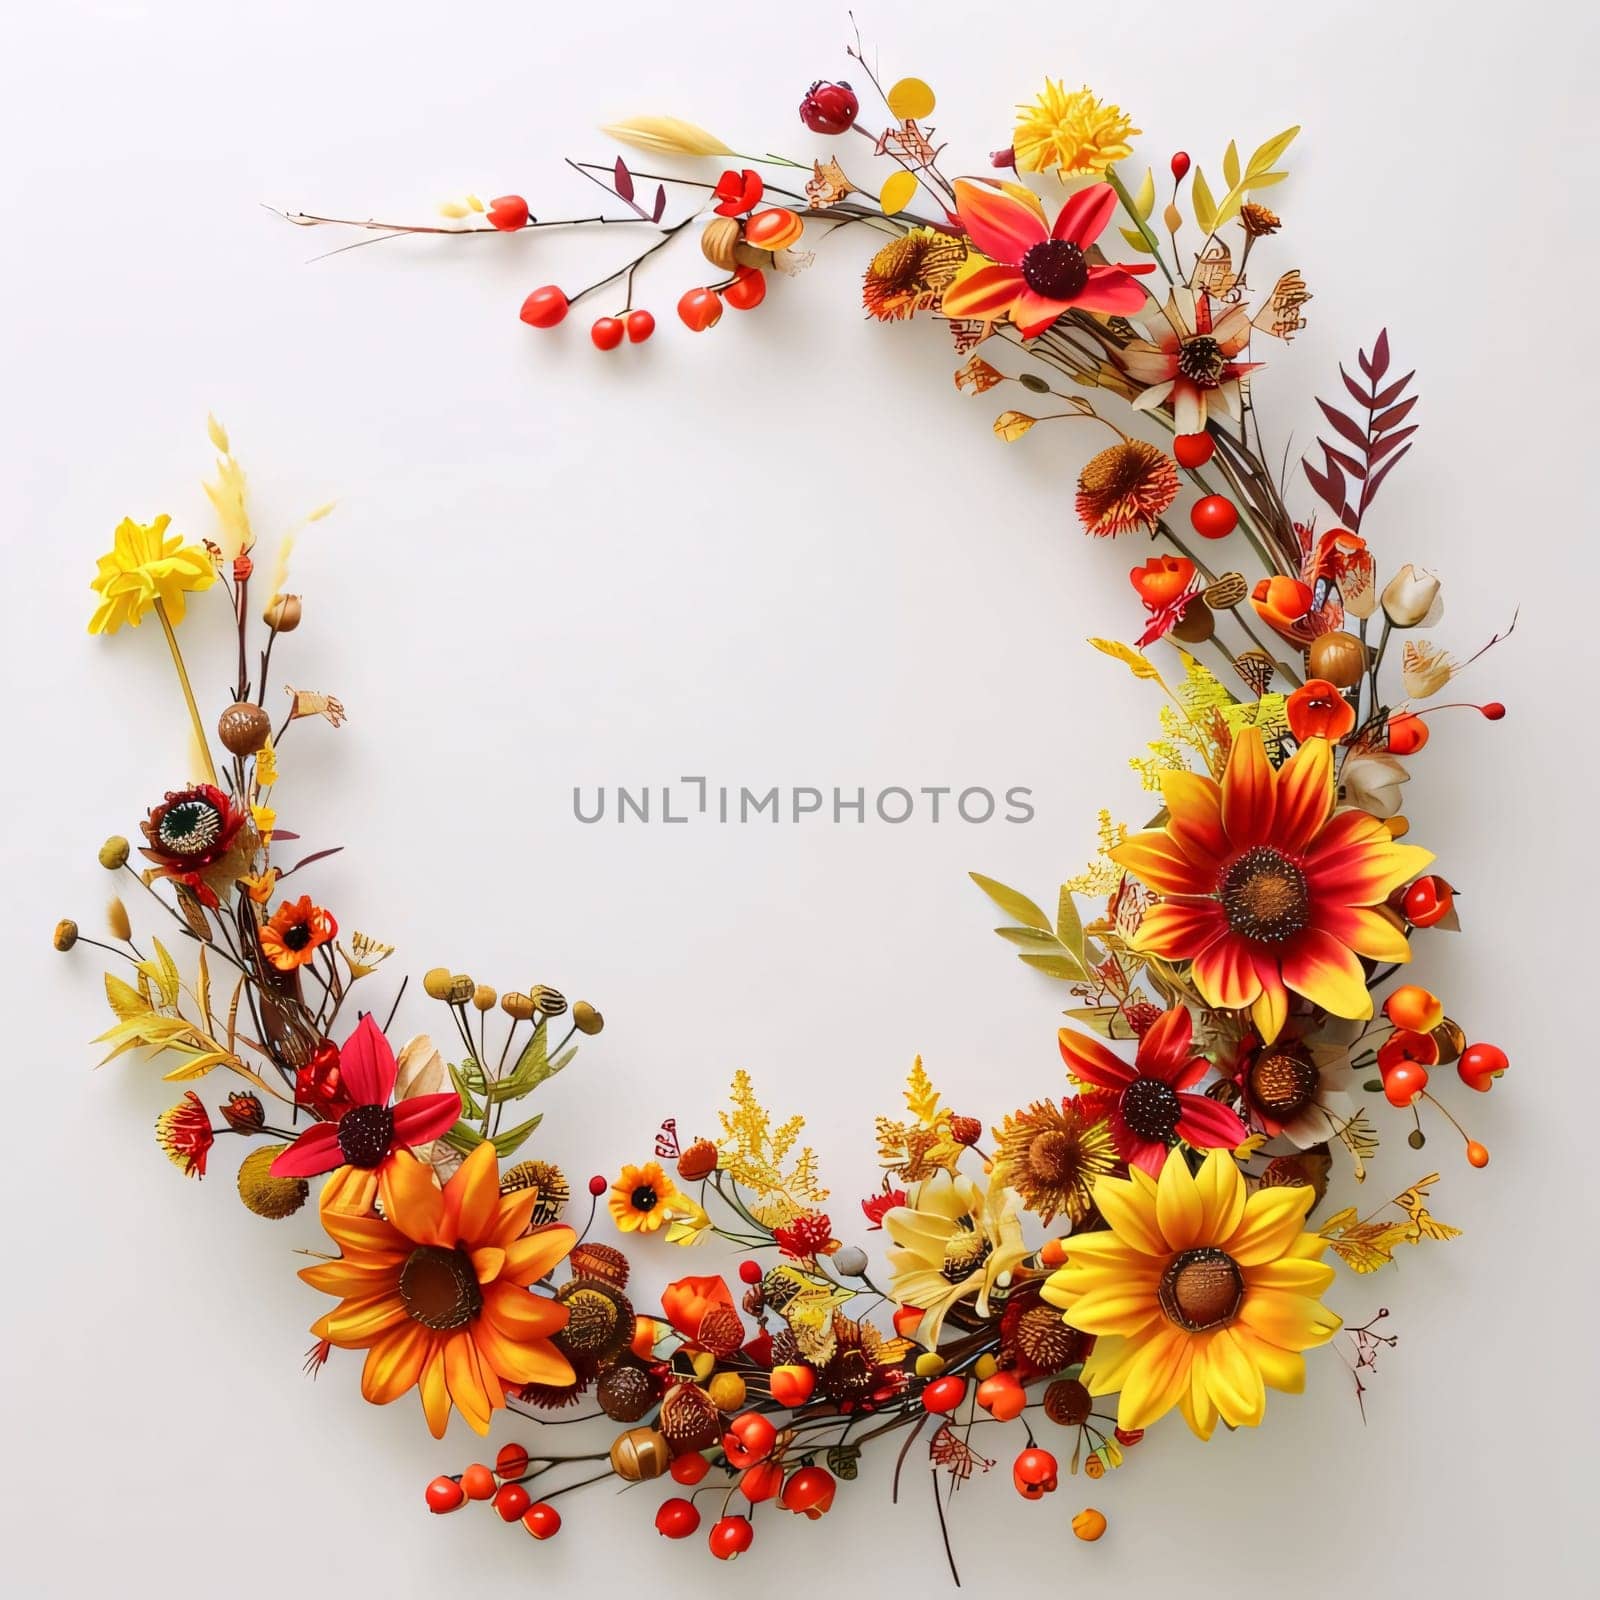 Round wreath of yellow and red flowers on a white background. Frame, space for your own content. Flowering flowers, a symbol of spring, new life. A joyful time of nature waking up to life.